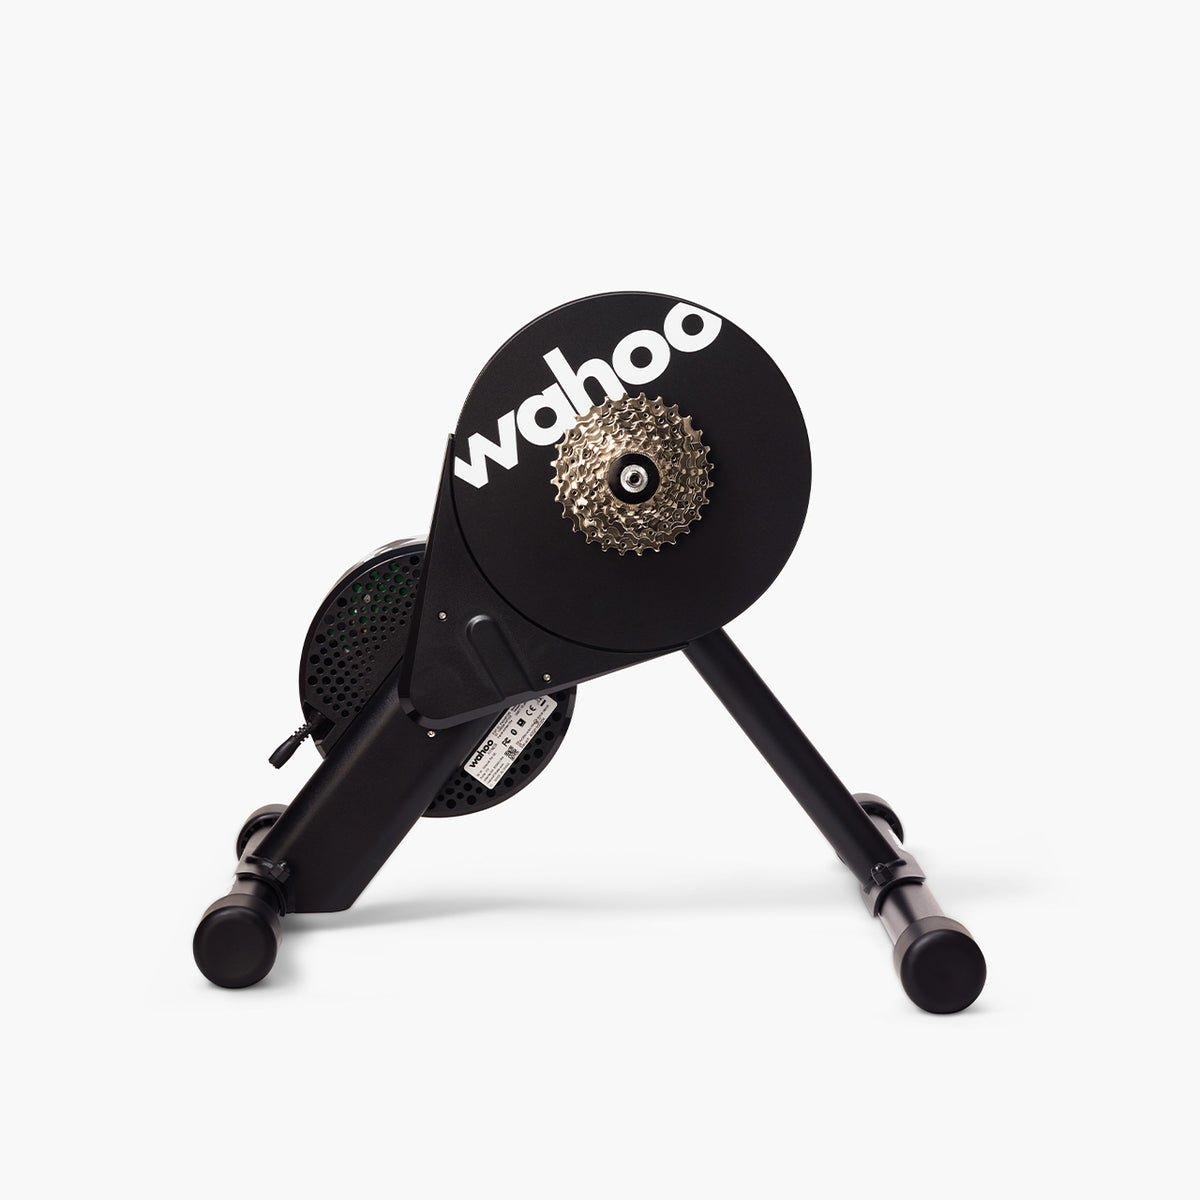 Wahoo KICKR CORE smart trainer with 9-speed cassette